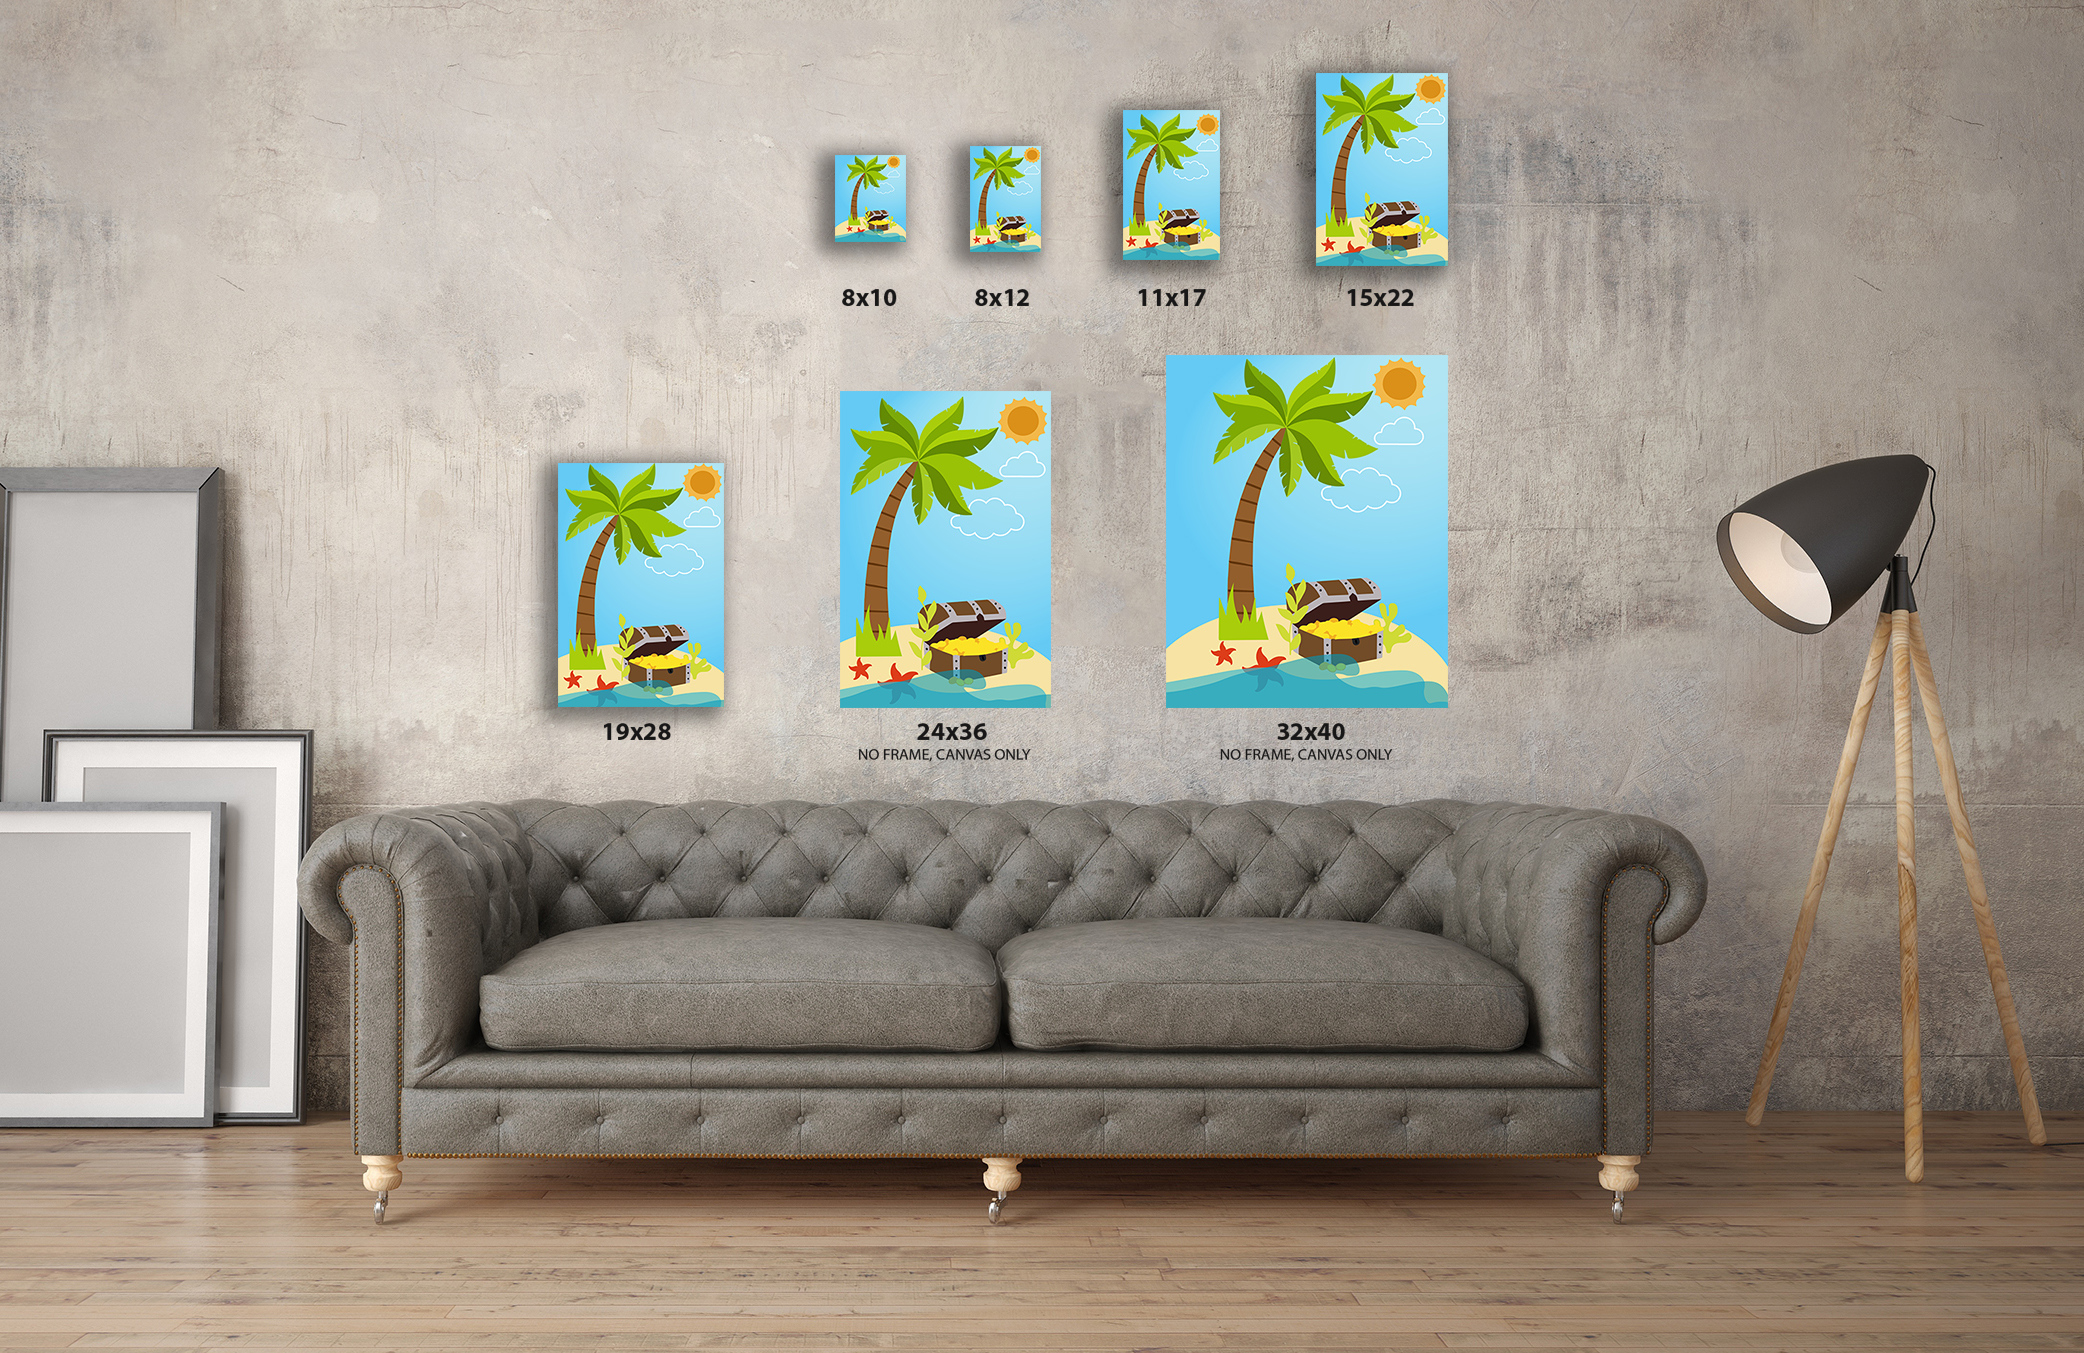 Awkward Styles Lovely Pirates Illustration Pirate Canvas Print Kids Room Wall Art Marine Picture Kids Play Room Wall Art Funny Pirates Art Newborn Baby Room Wall Decor Pirates Wallpapers Made in USA - image 3 of 6